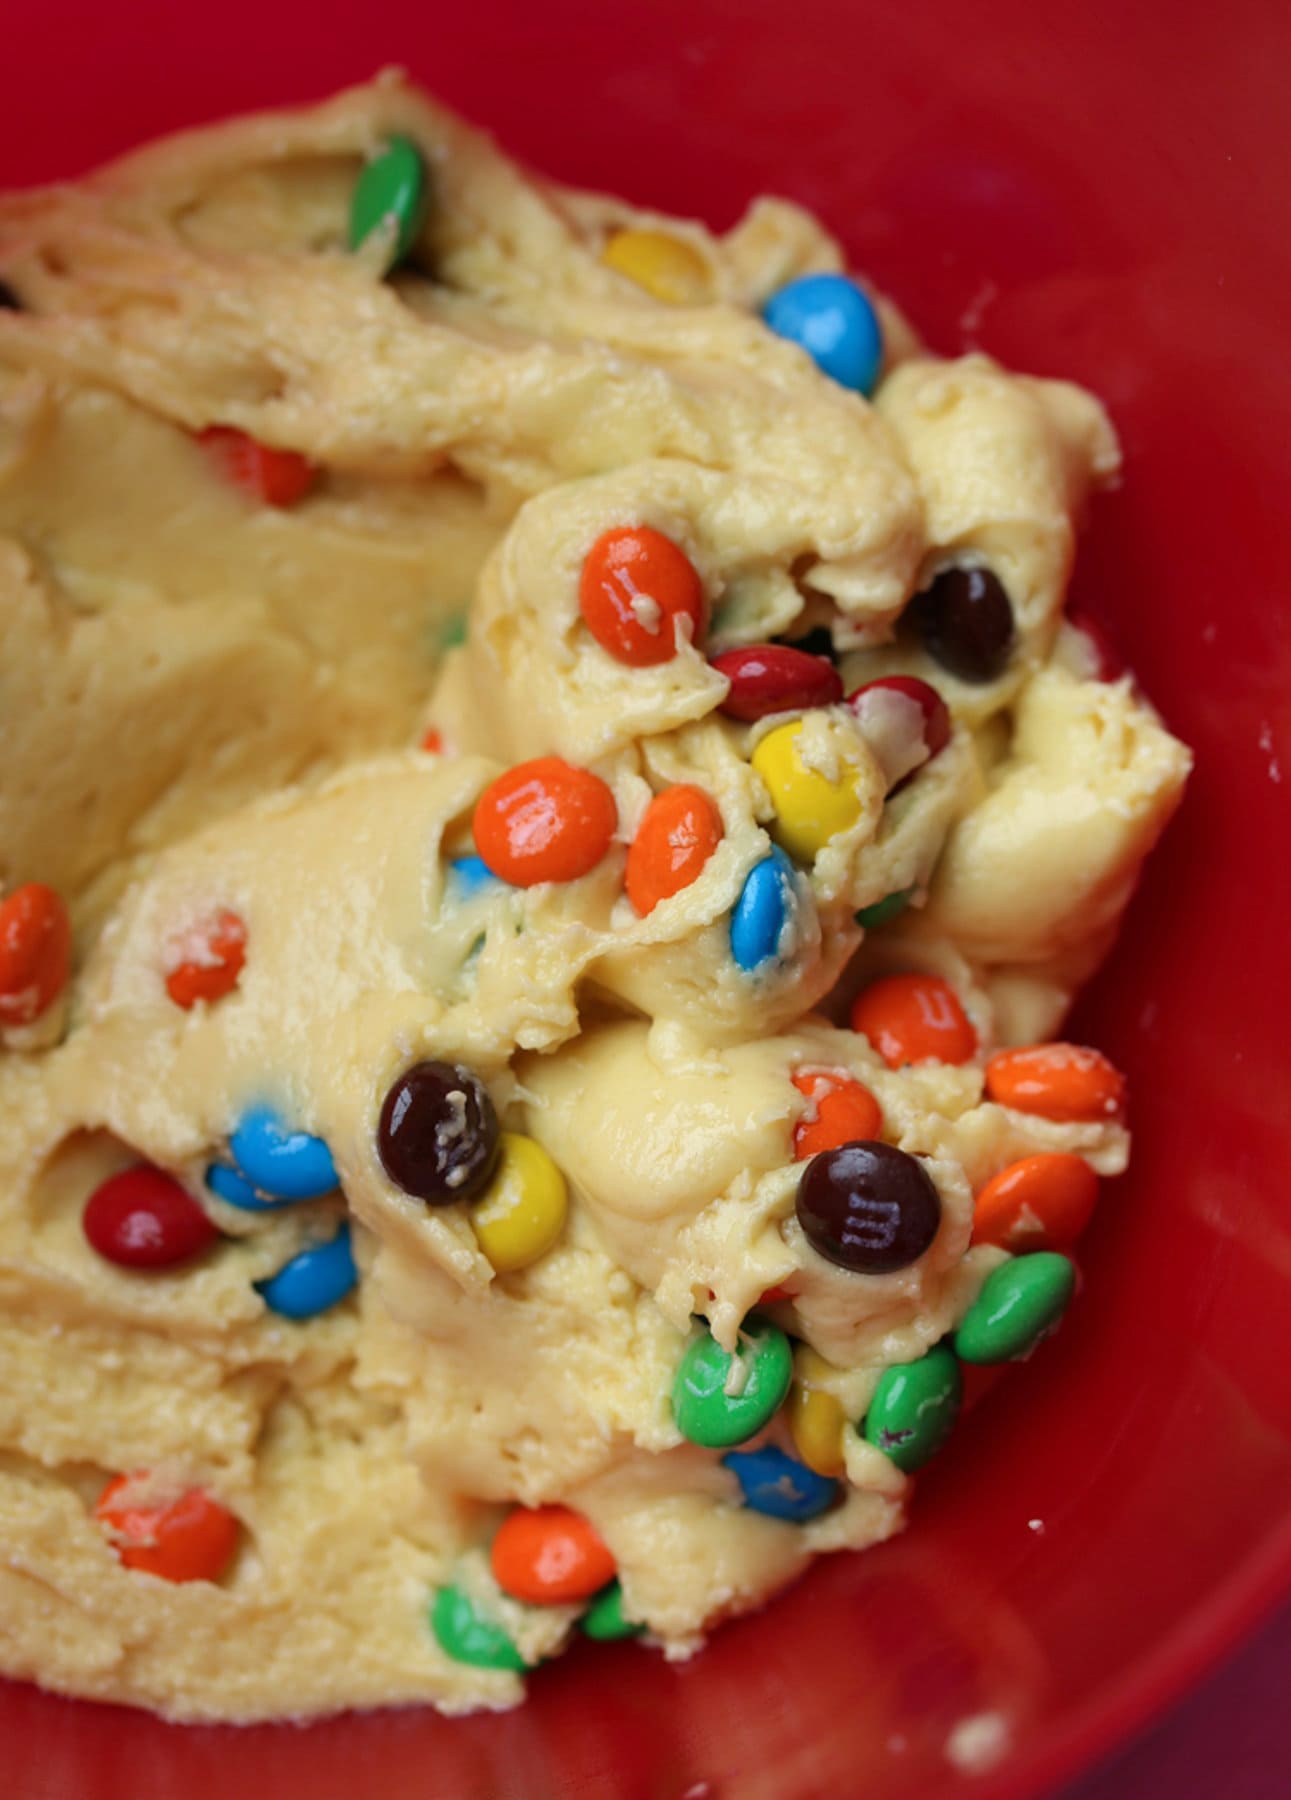 Cookie dough with M&Ms in it.